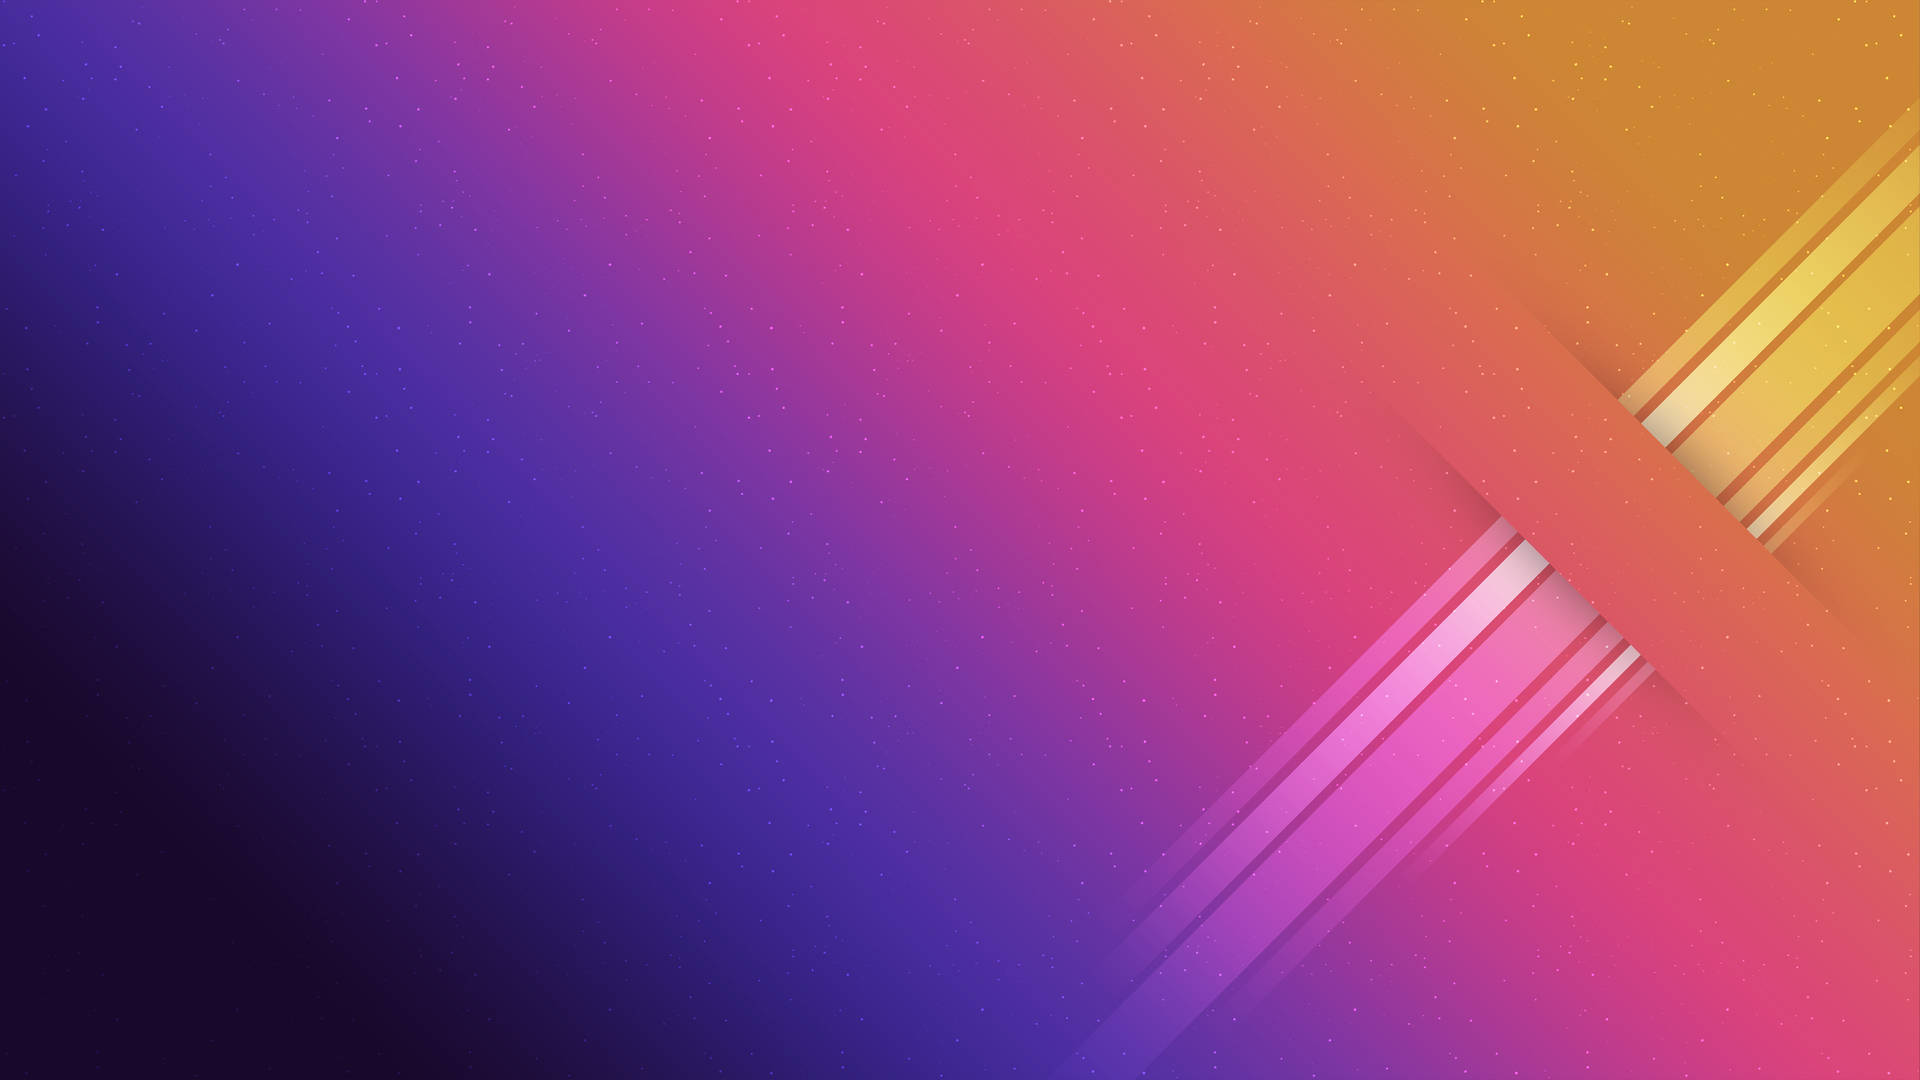 Simple Hd Purple And Pink Wallpaper